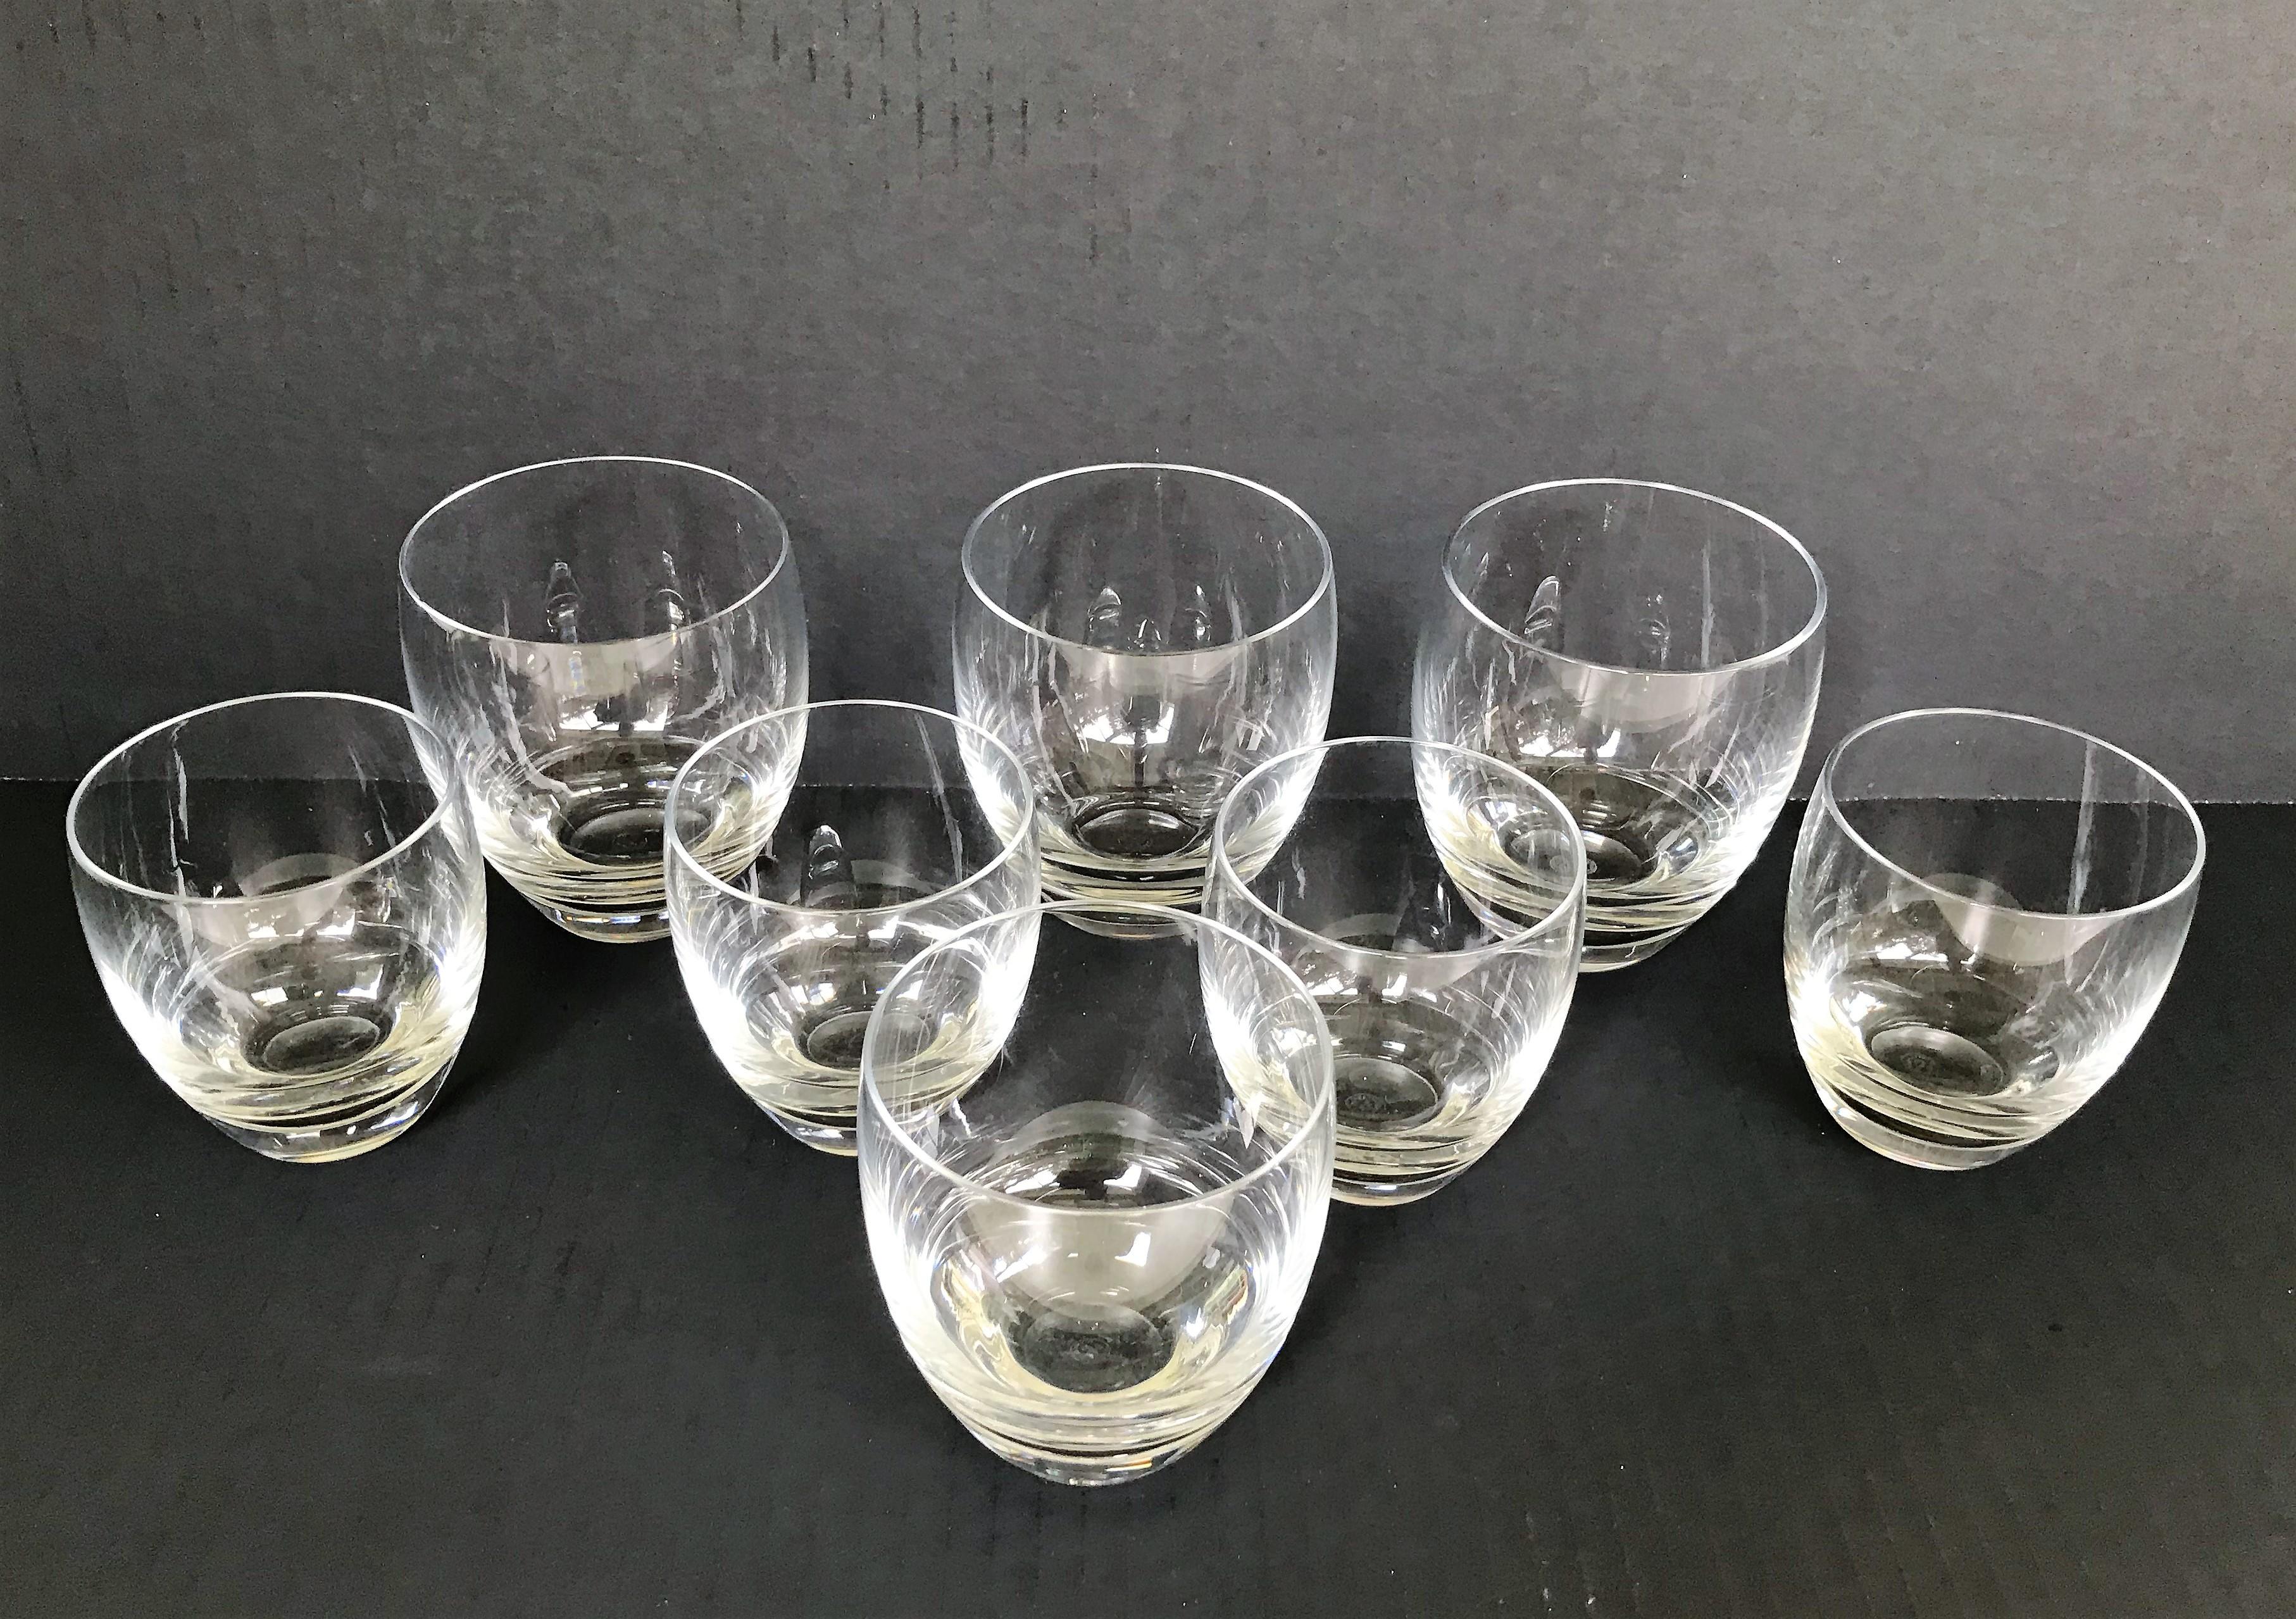 From the 1970s, Baccarat crystal glassware in the Perfection pattern...8 barrel shaped Tumblers of different sizes : Three (one w. small flake) 15 oz. - 4 inches high, One 10 oz. 3 5/8 inches high and Four 8 oz. 3 1/2 inches high. Lovely simple